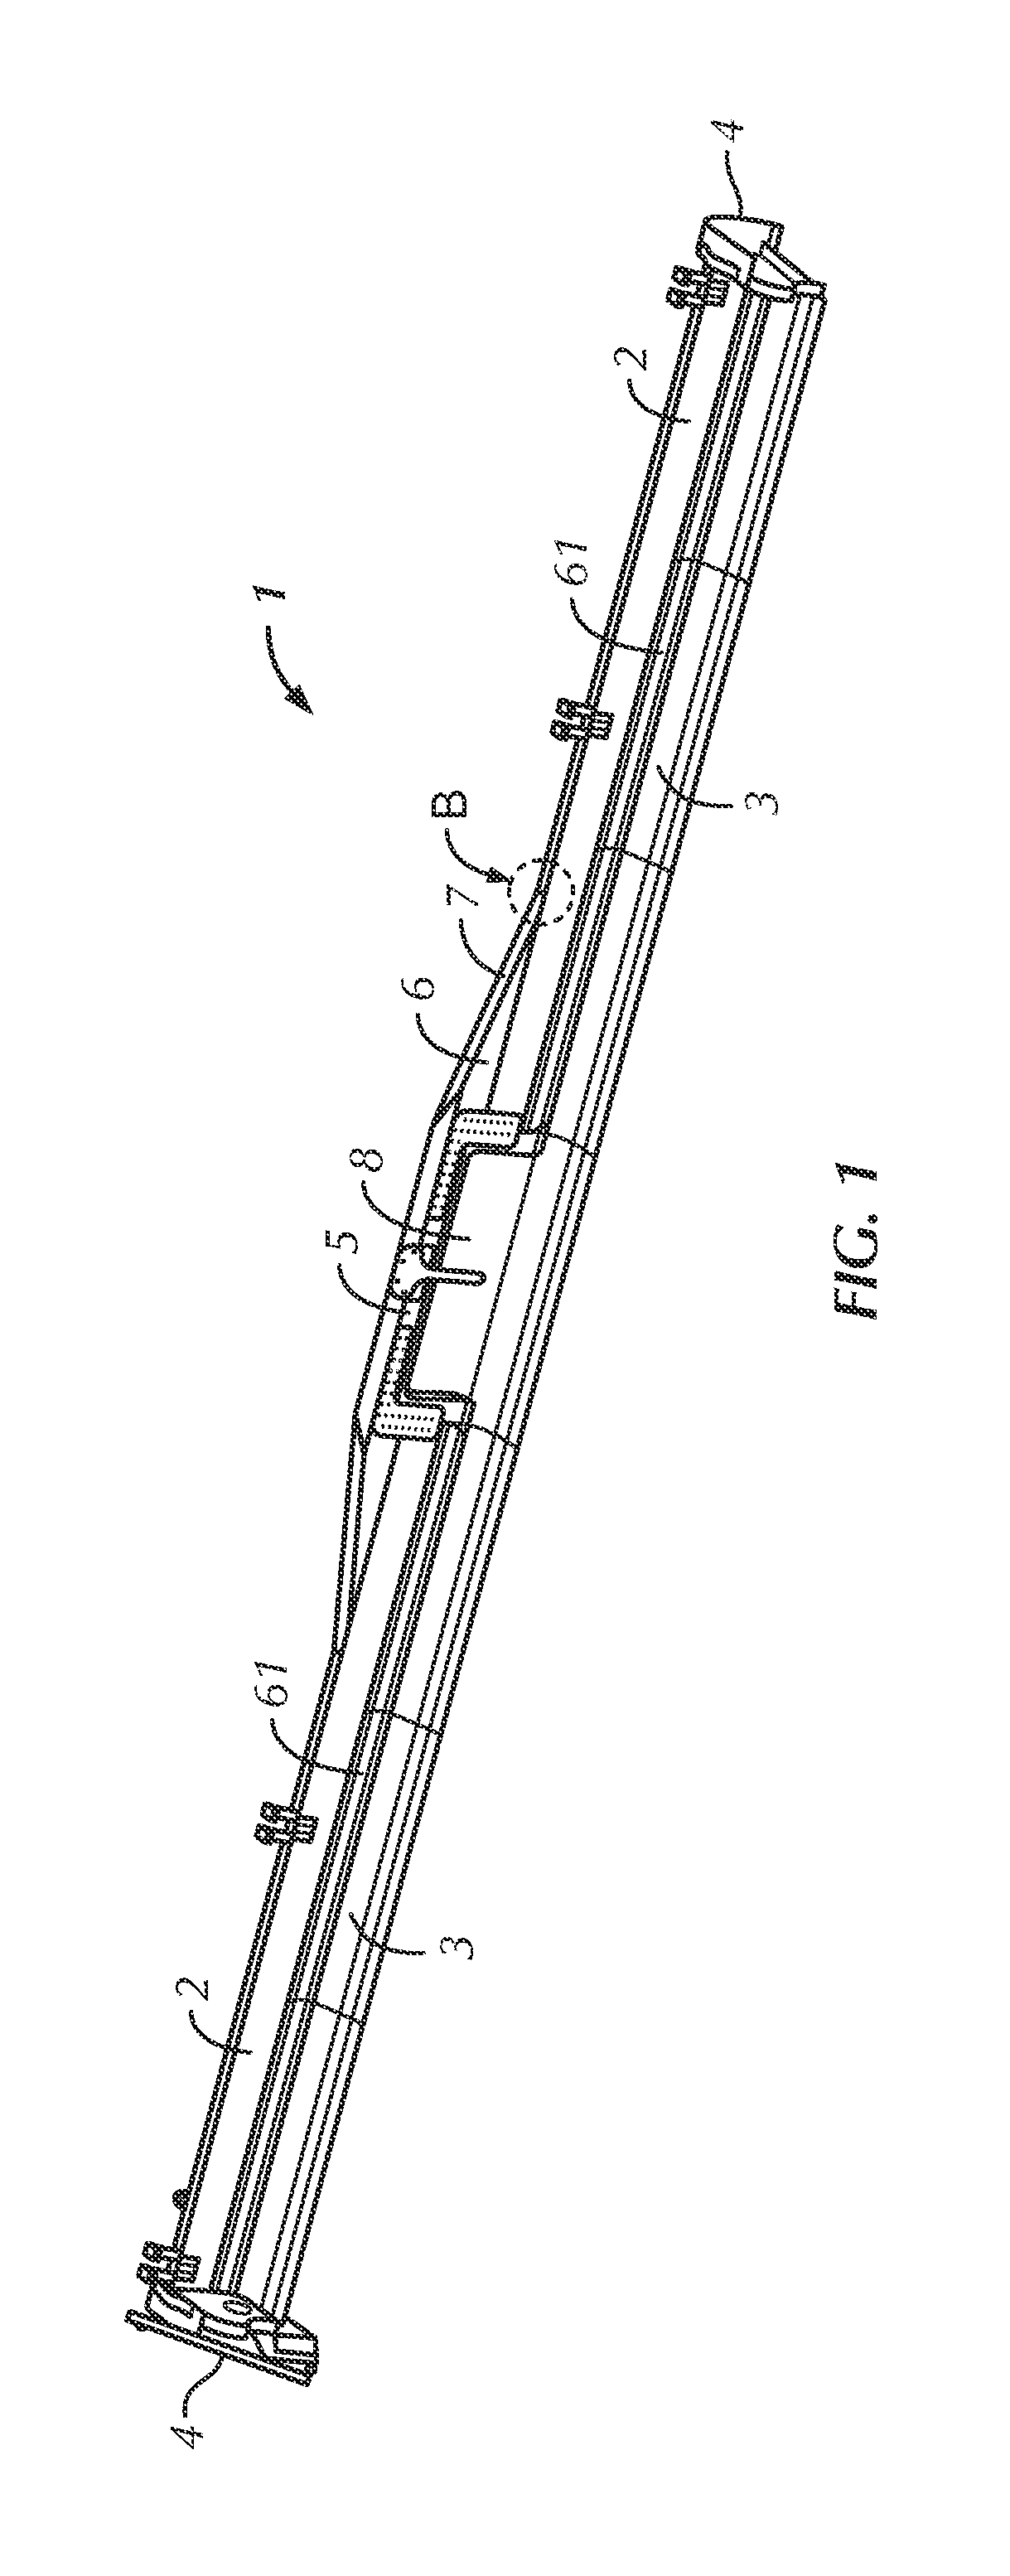 Harvesting attachment for a harvester